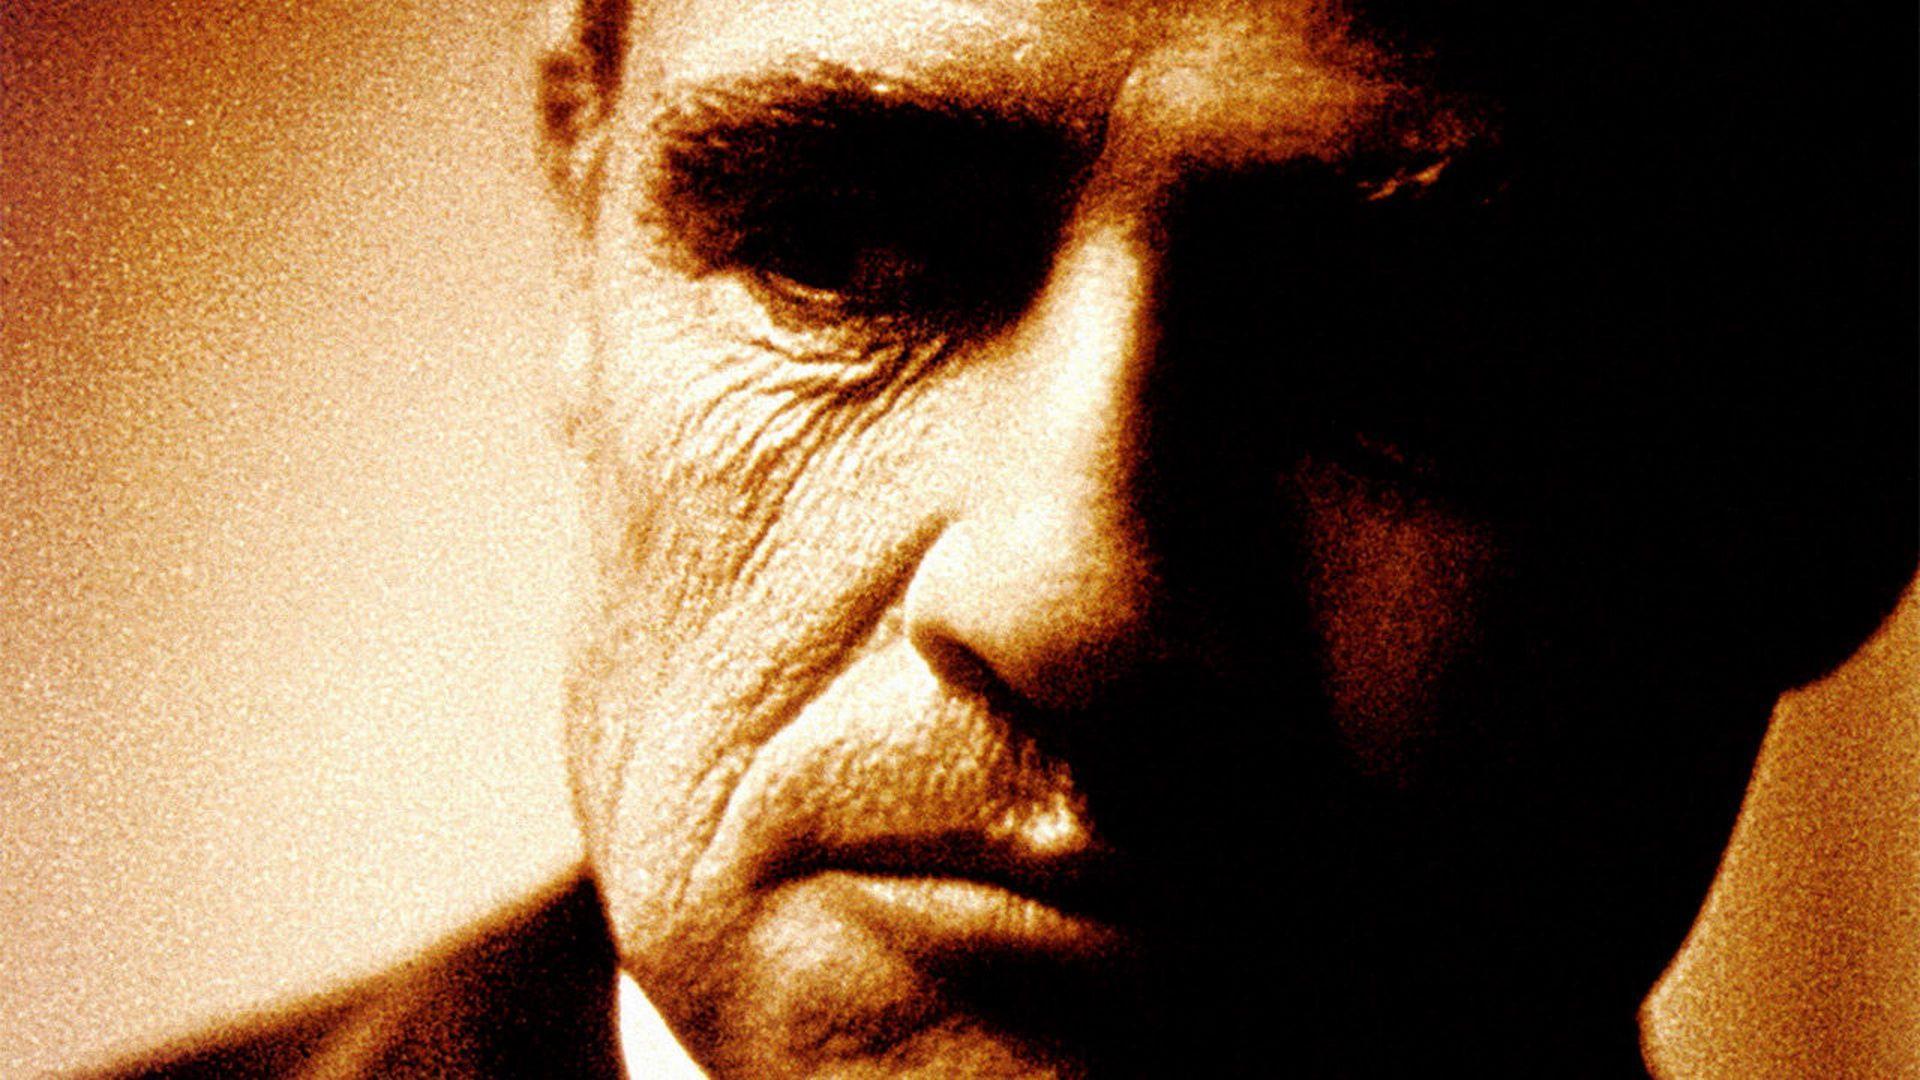 The Godfather Film Wallpaper